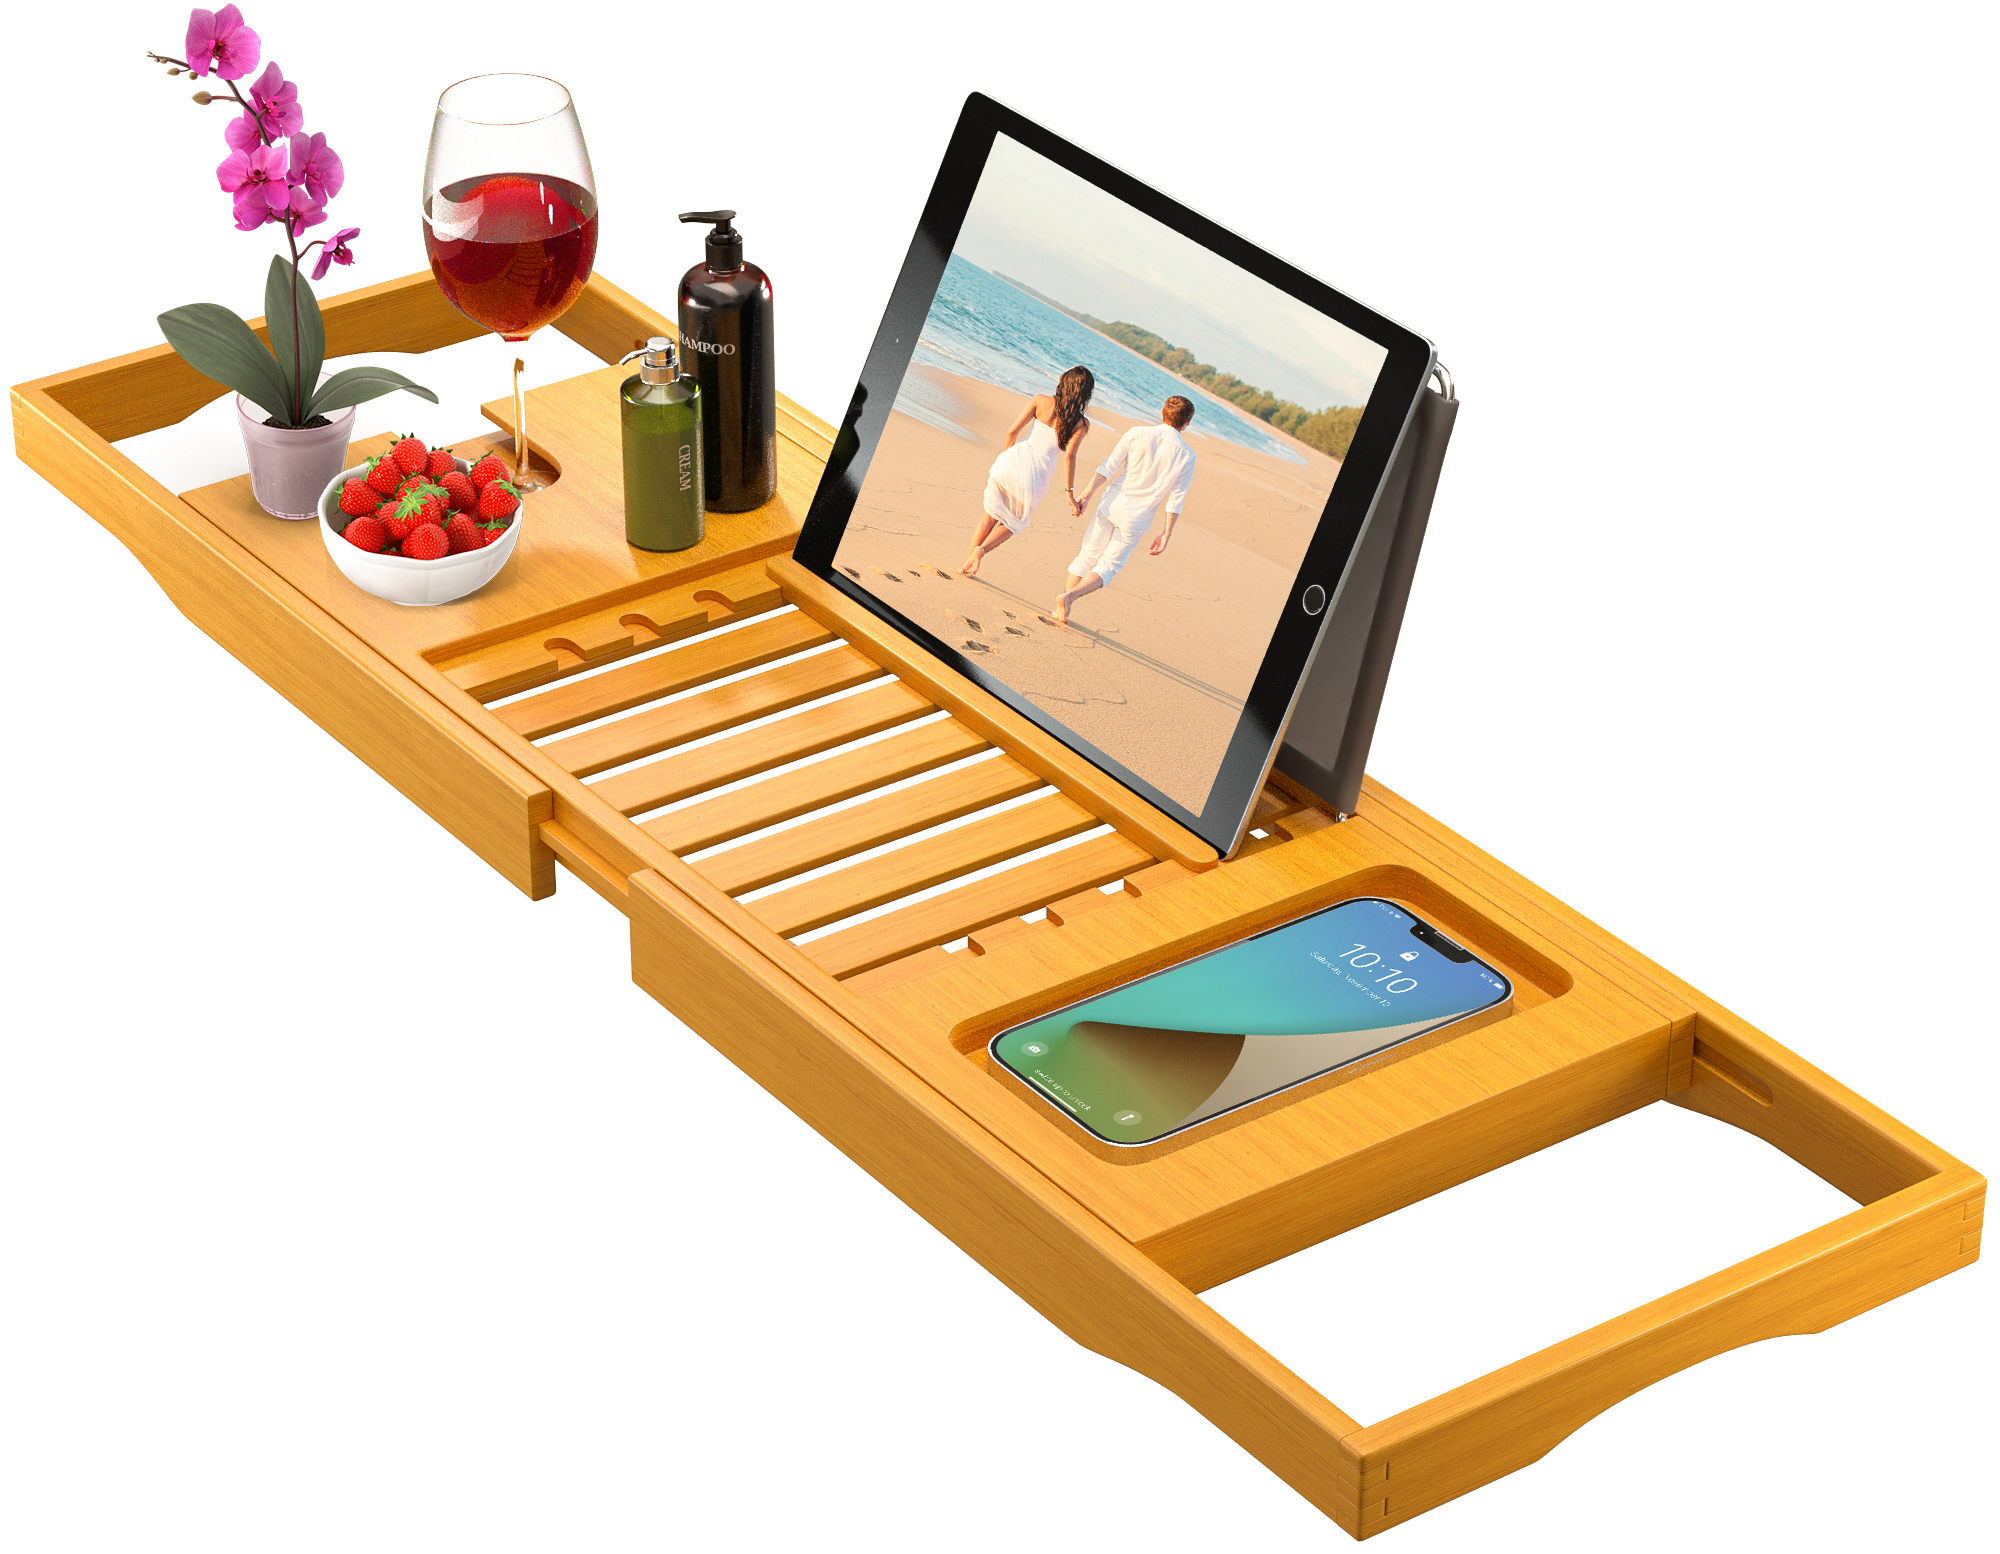 Bambusi Bamboo Bathtub Tray With Extending Sides, Reading Rack, Tablet Holder, Cellphone Tray & Integrated Wine Glass Holder. - image 1 of 8